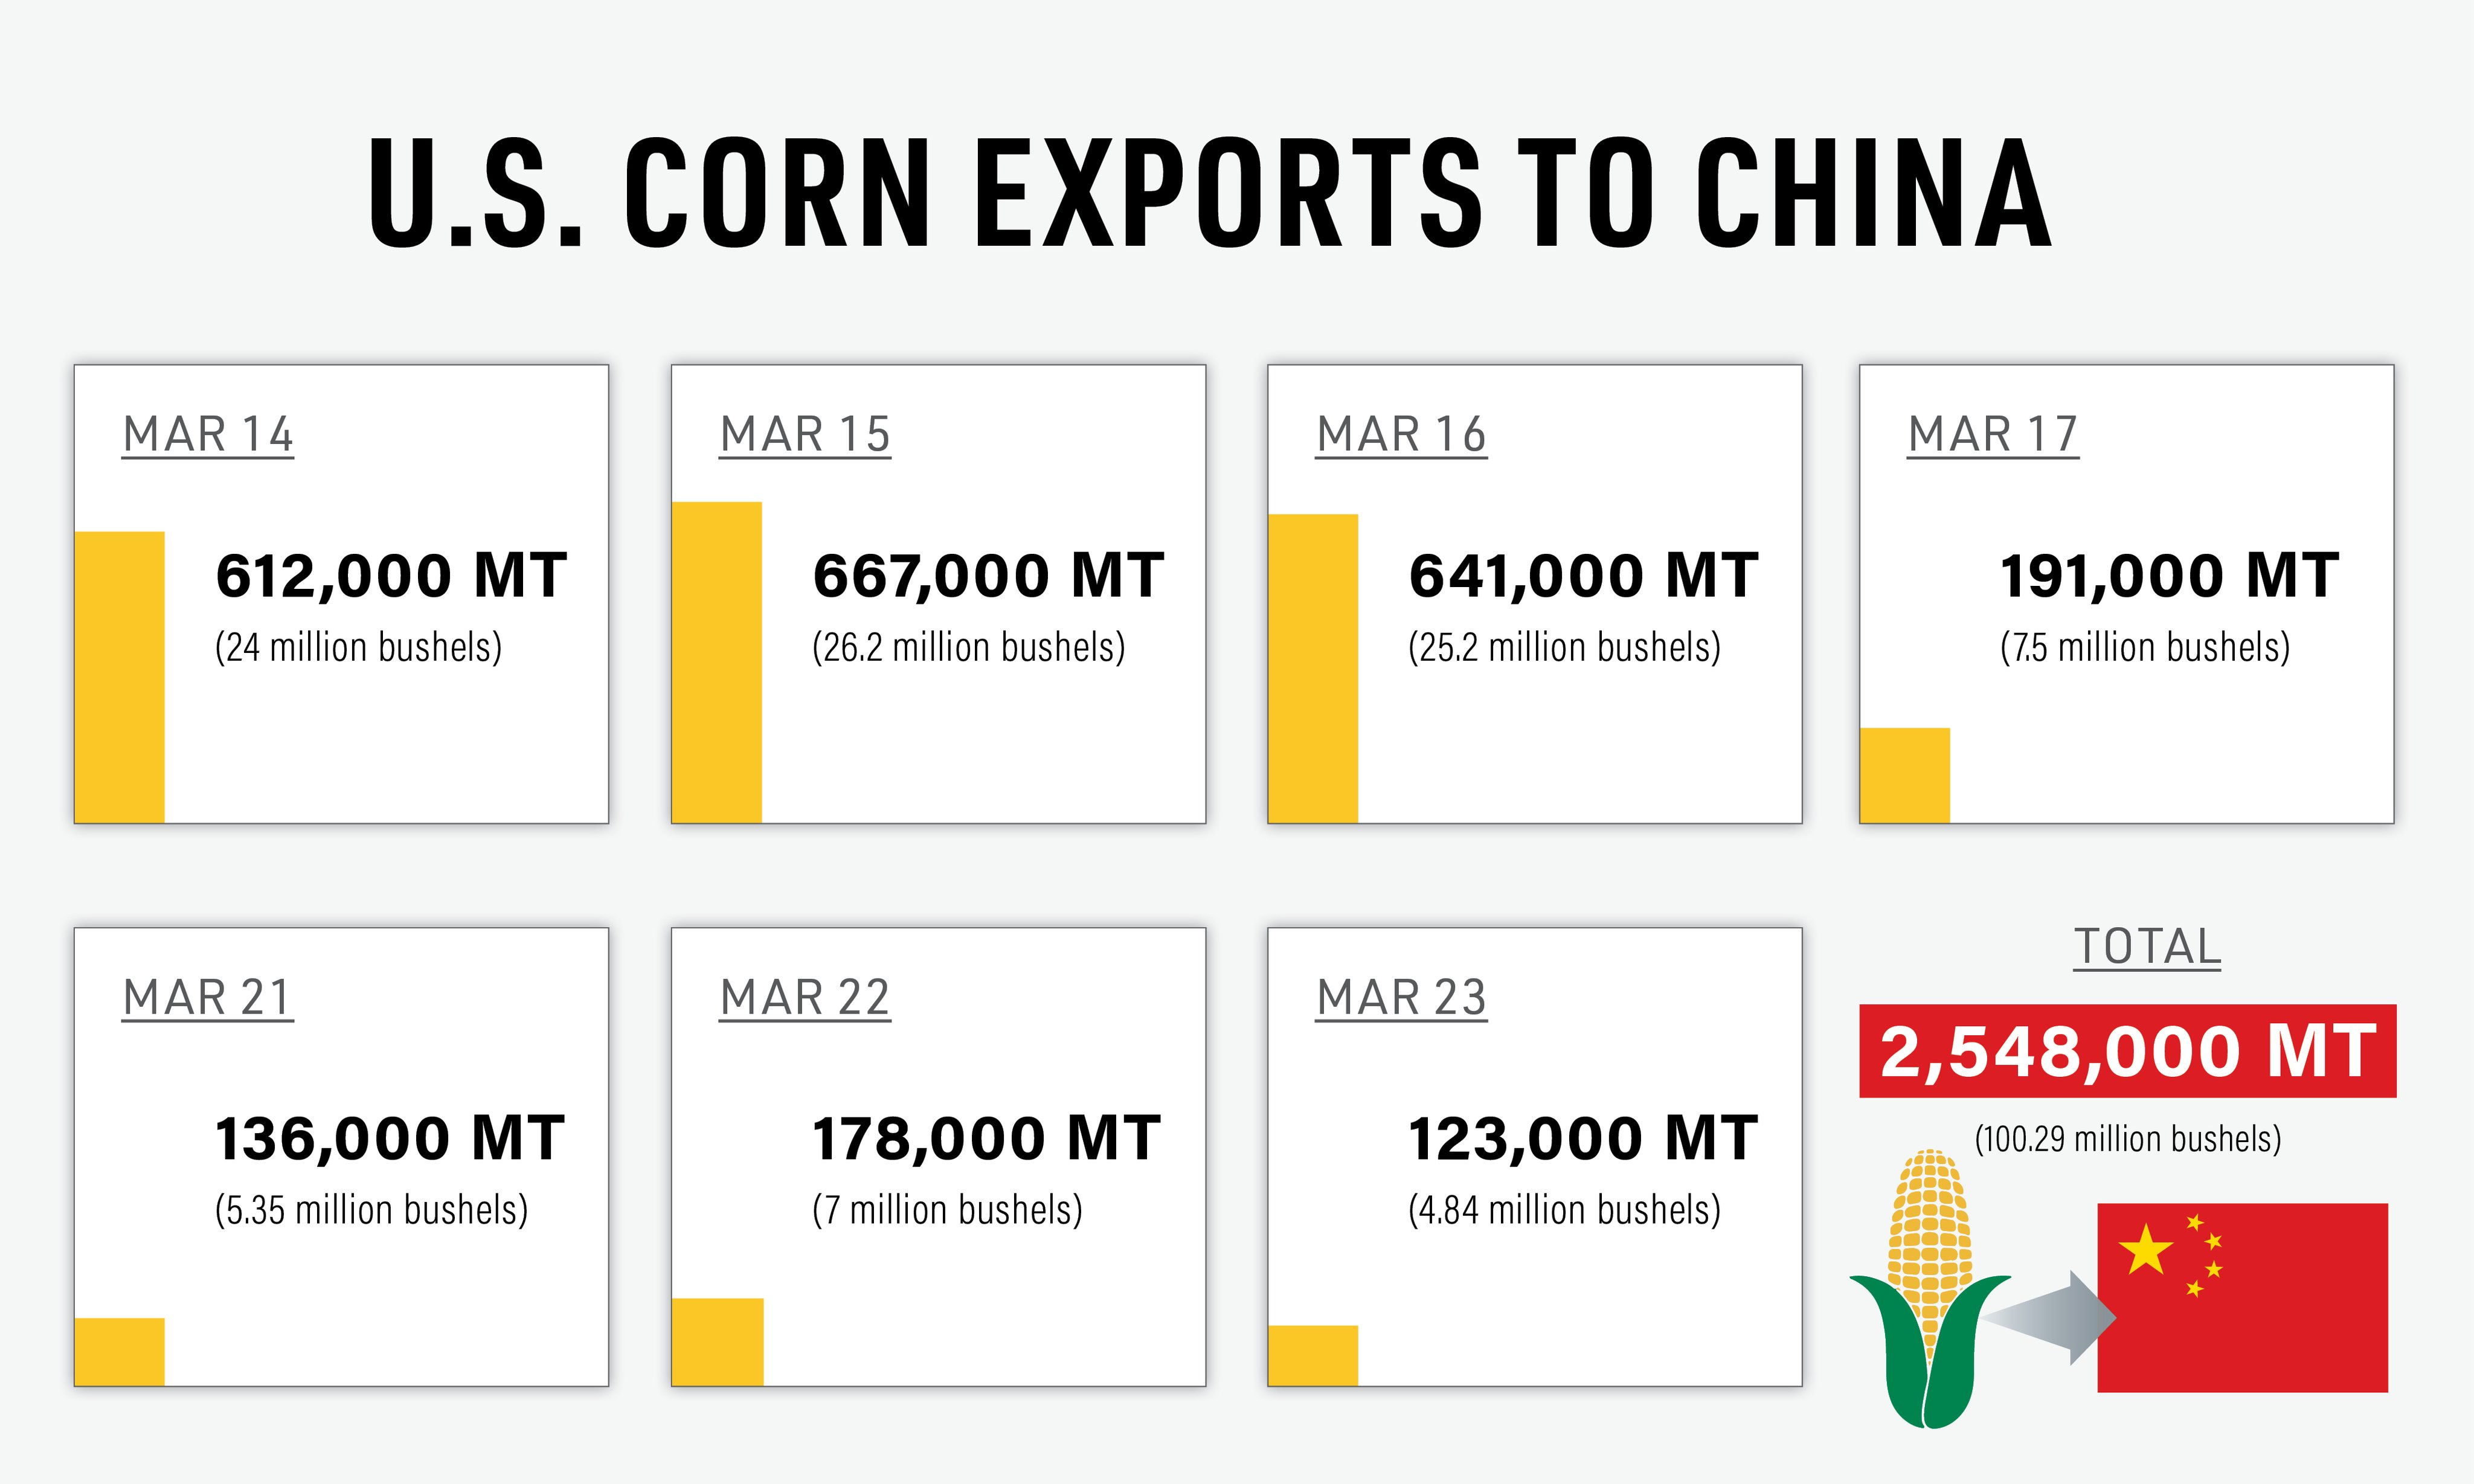 AgDay TV on Twitter: "BREAKING: From USDA-Private exporters reported sales of 204,000 metric tons (8 million bushels) of corn for to China during the marketing year. Here are all the